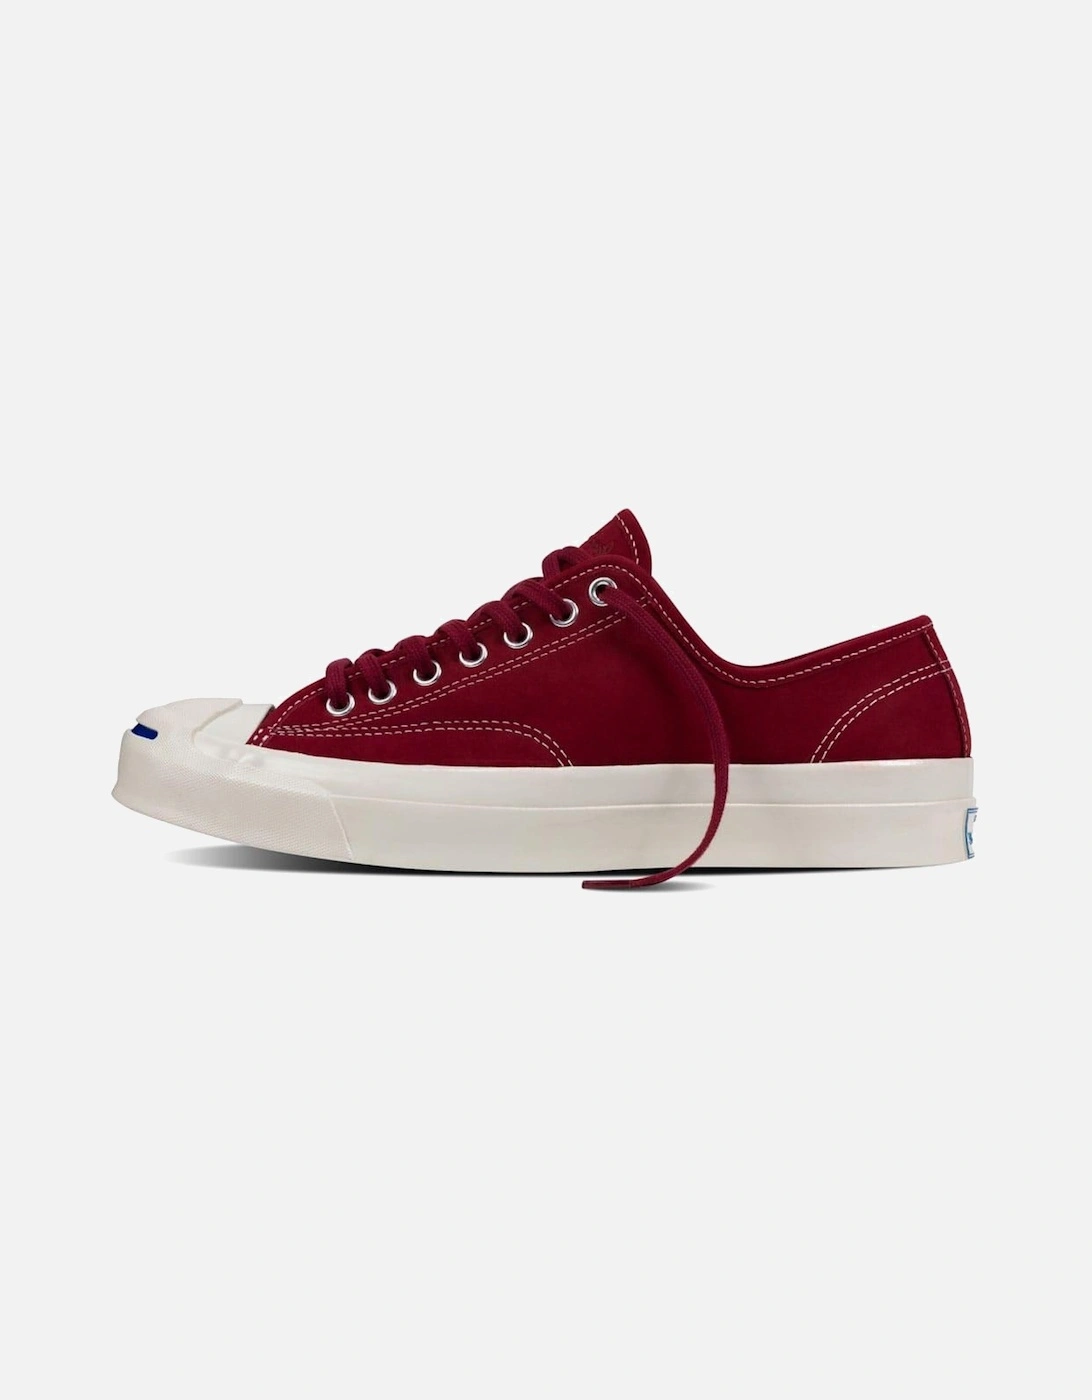 Jack Purcell Signature OX Nubuck - Red Block, 6 of 5